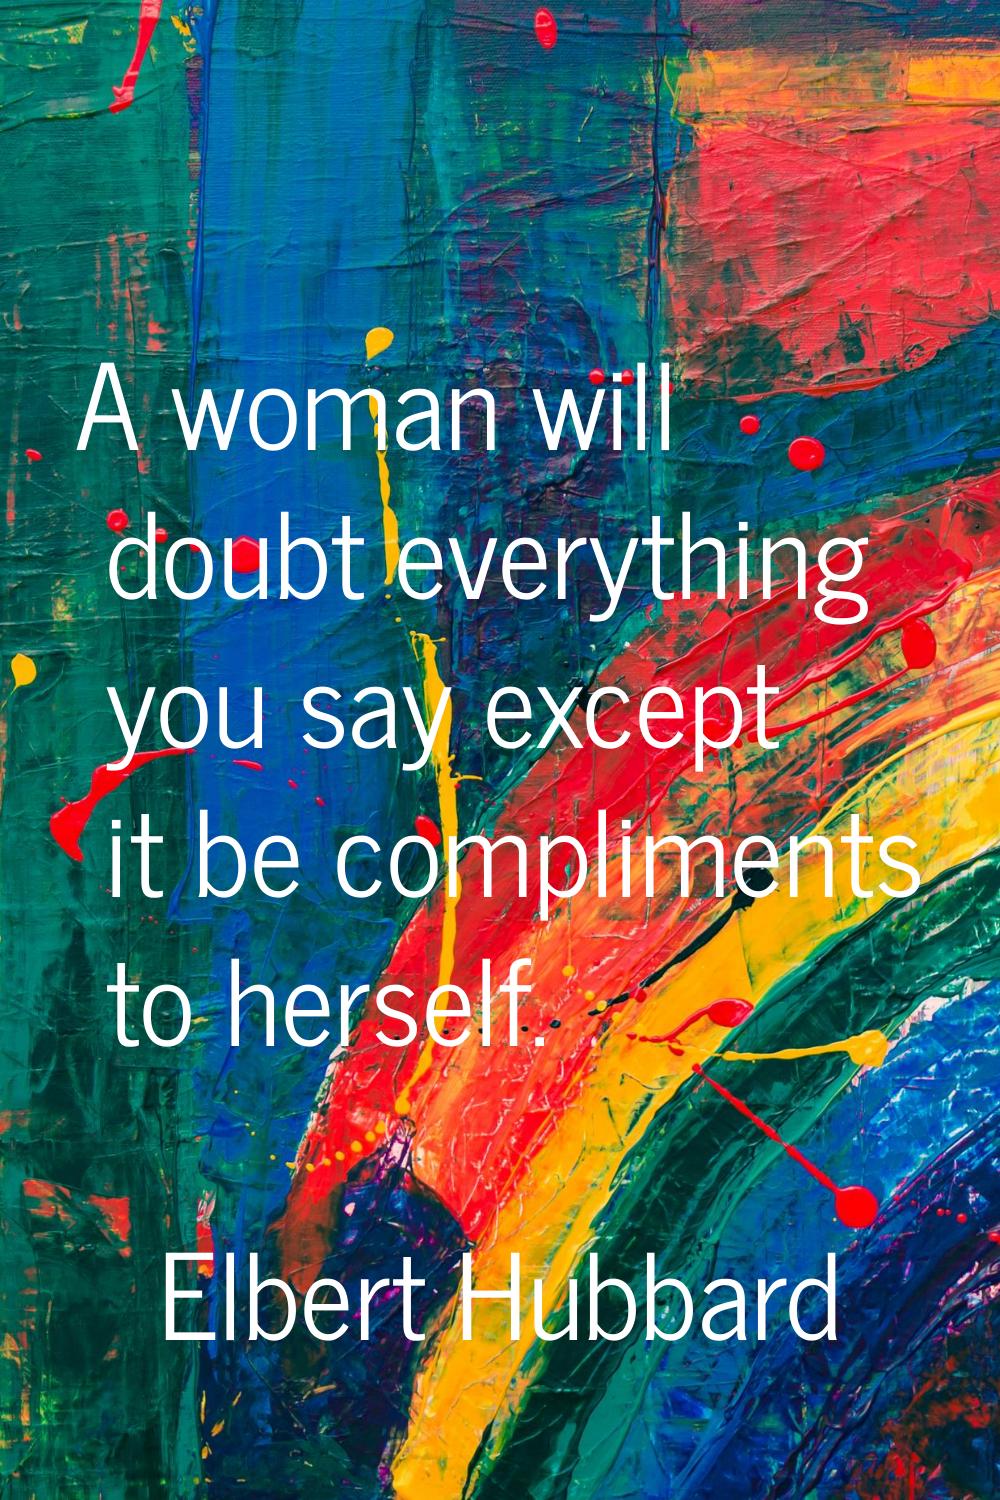 A woman will doubt everything you say except it be compliments to herself.